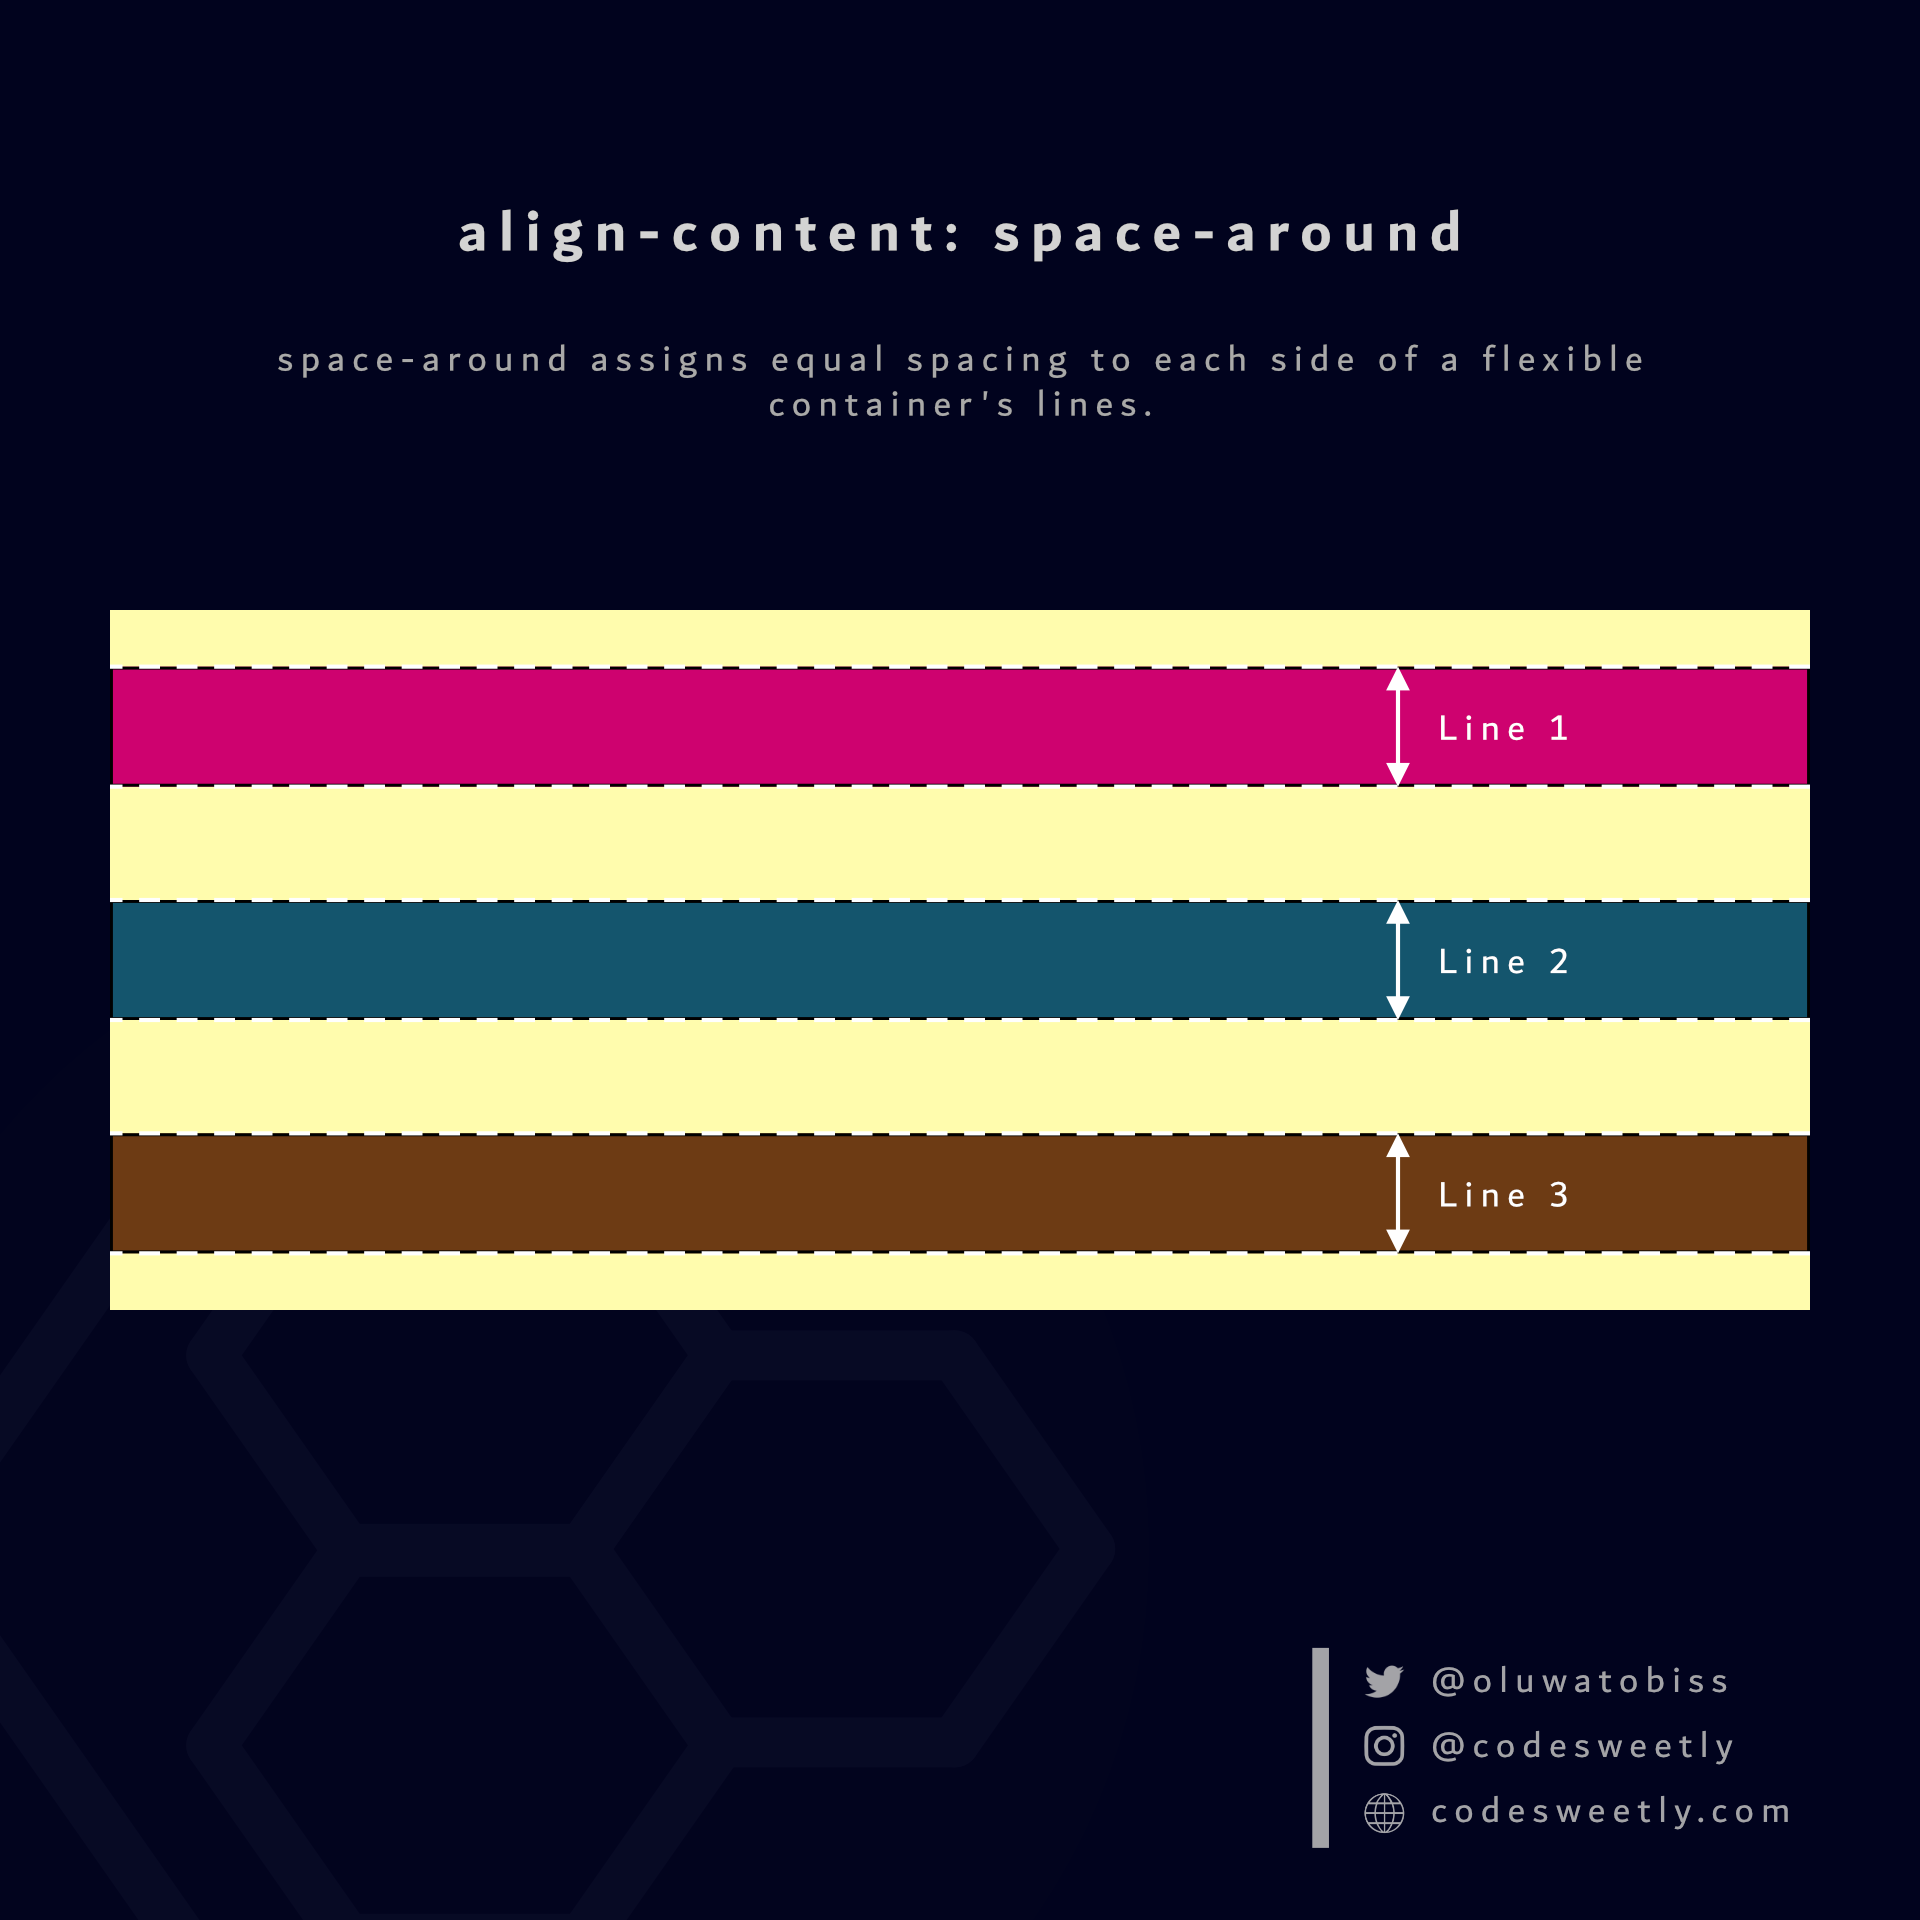 align-content's space-around value assigns equal spacing to each side of a flexbox's lines